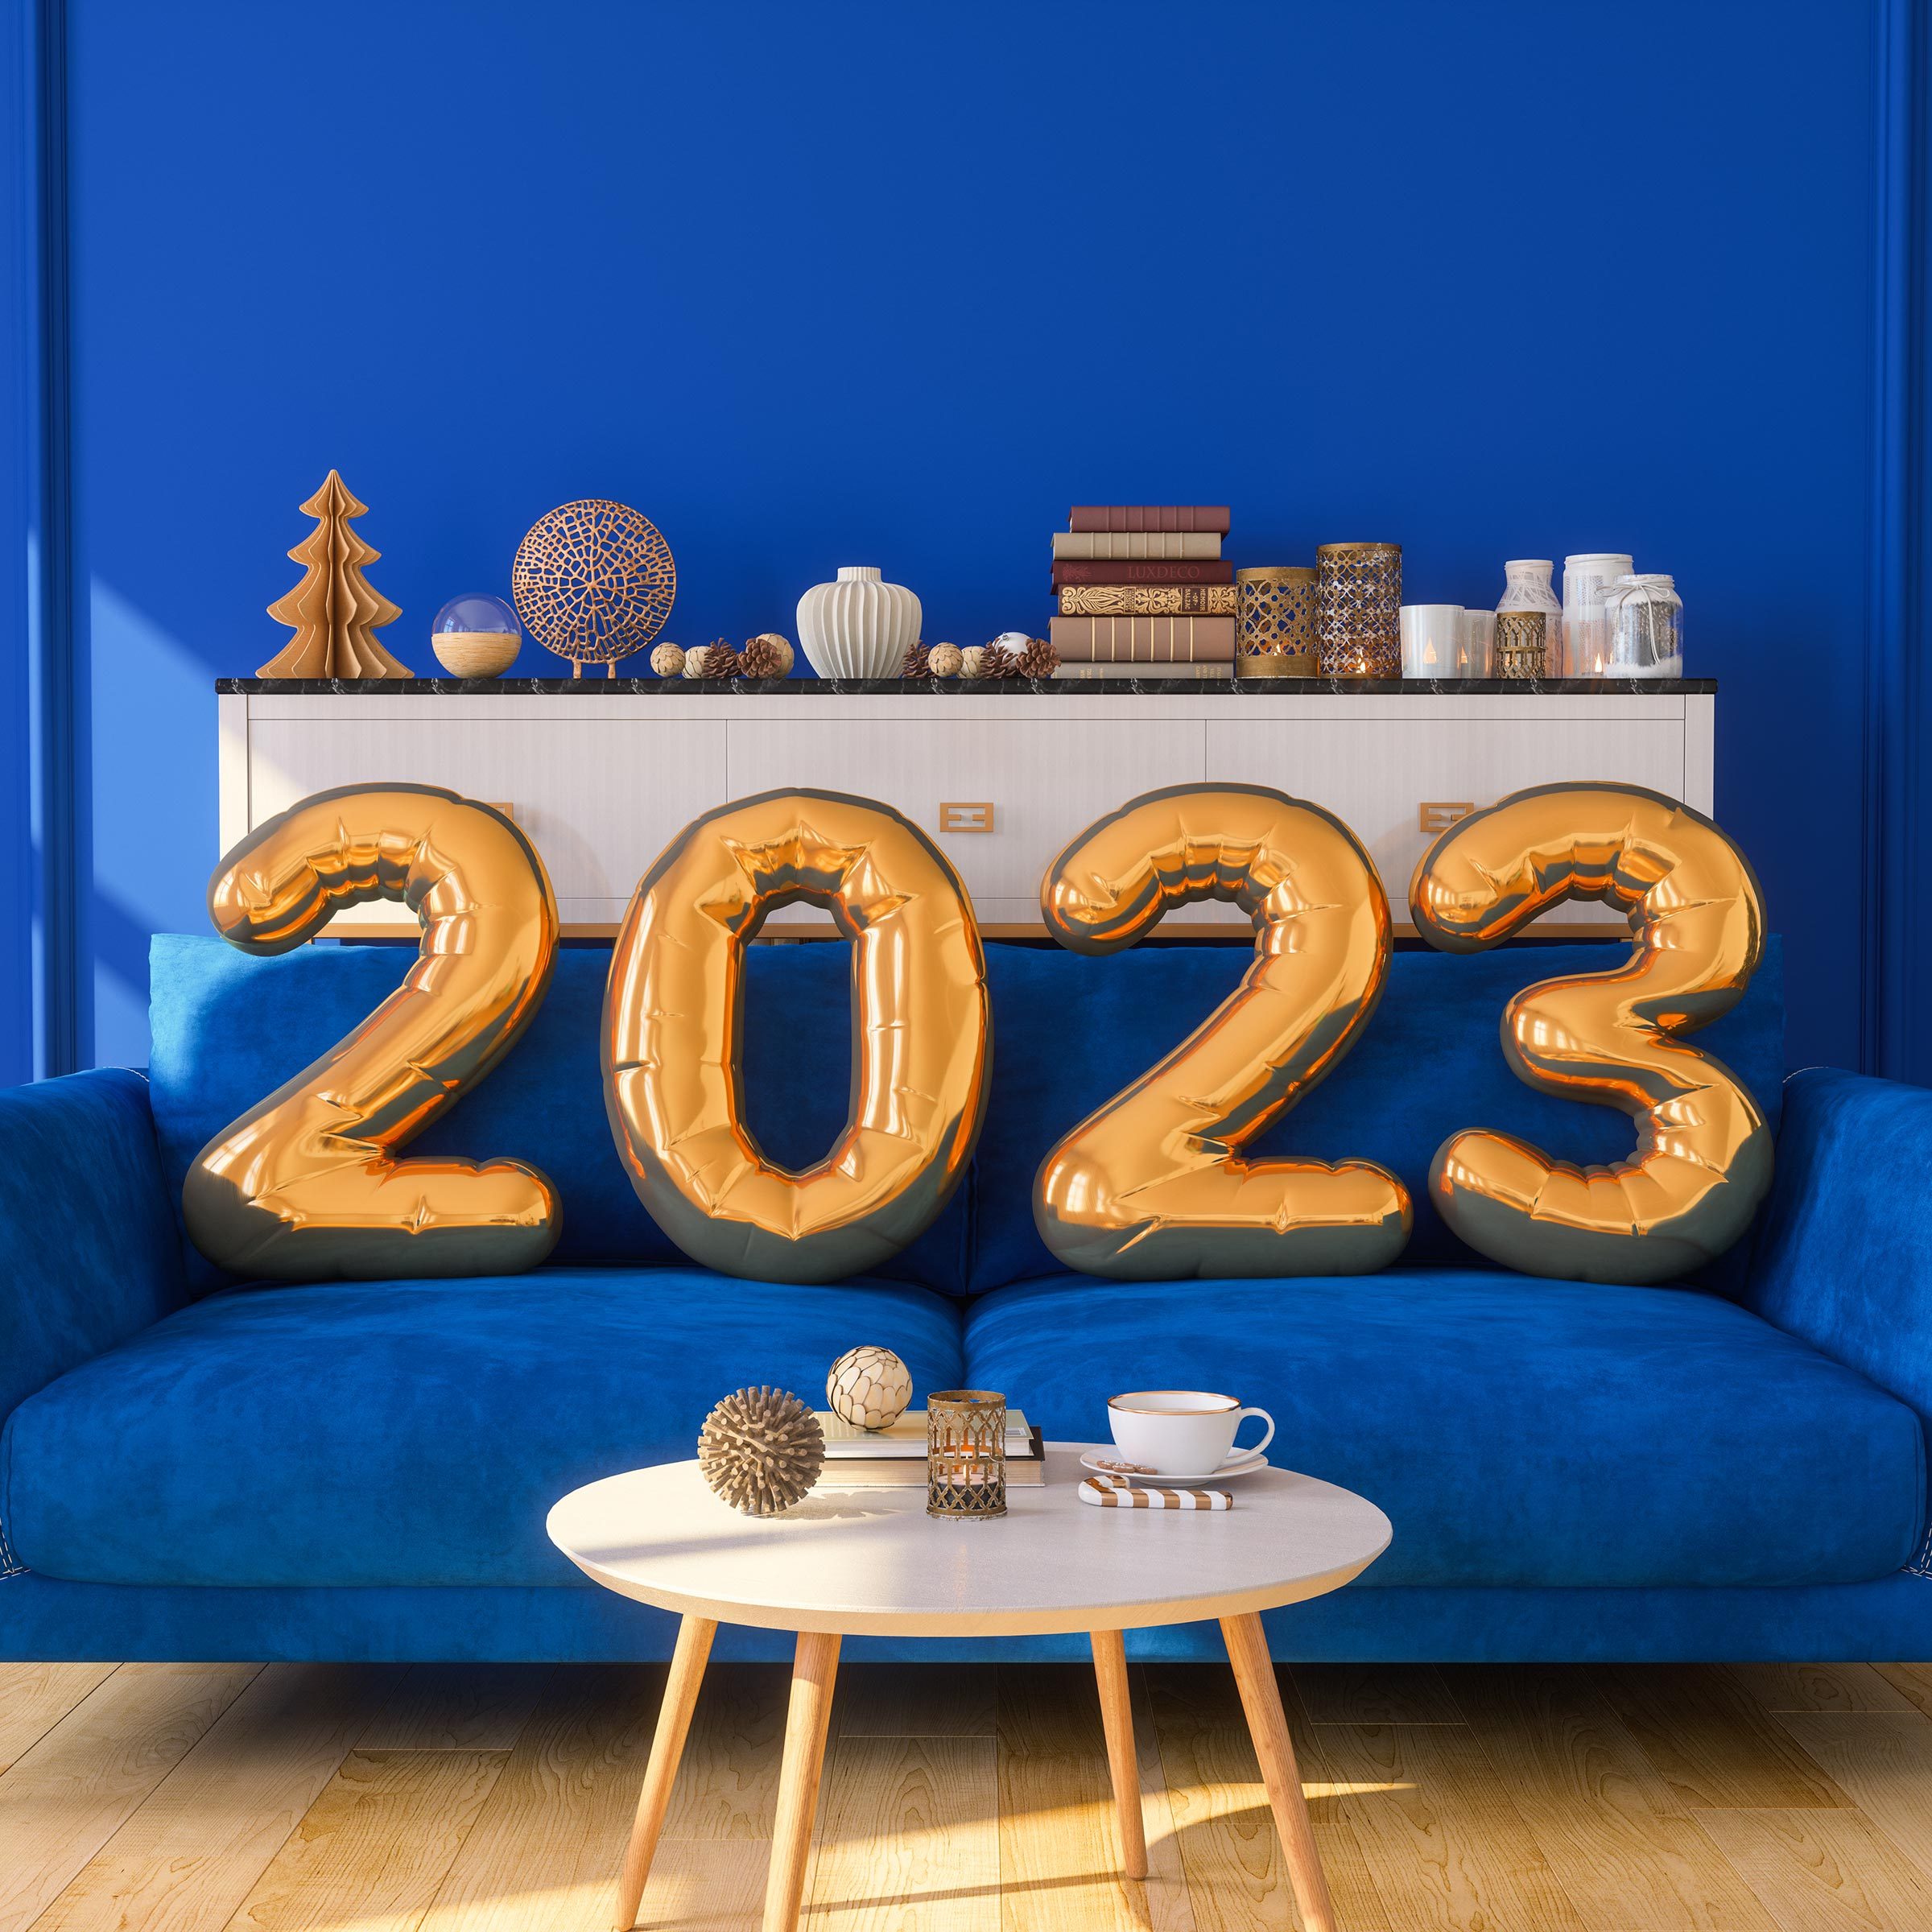 These Are the Top Interior Design Trends for 2023, According to